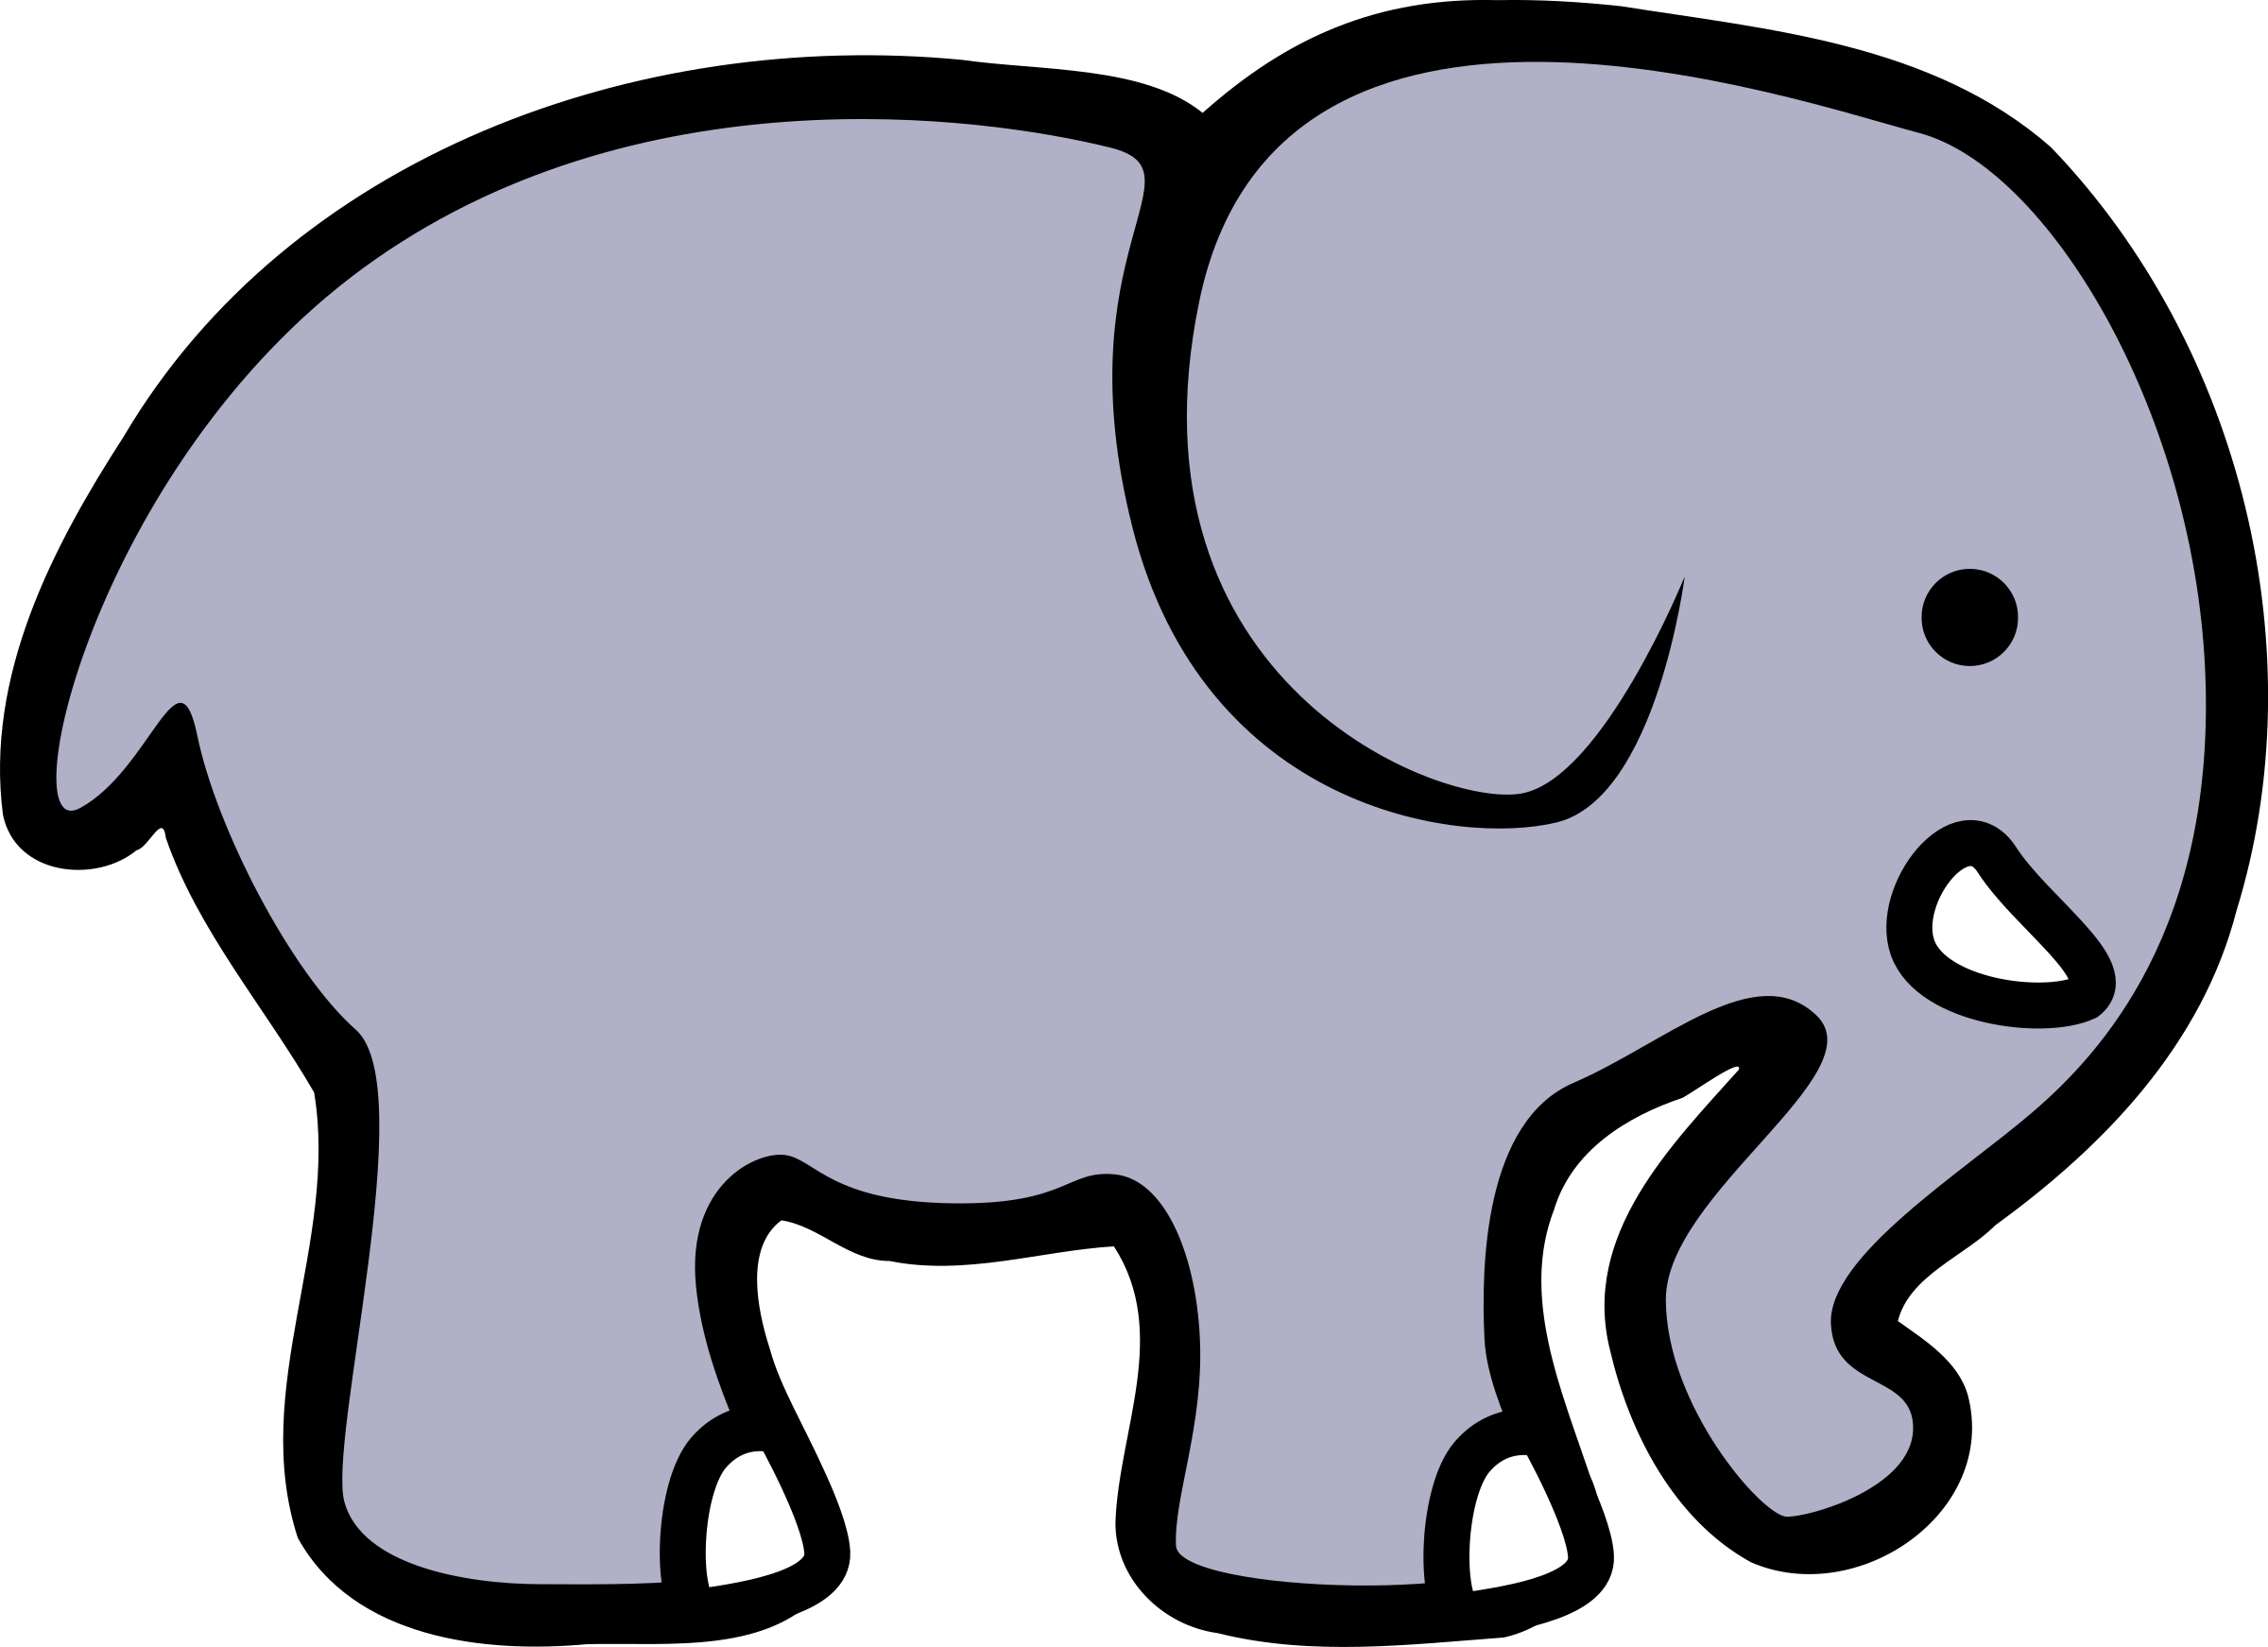 2D cartoon elephant Icons PNG - Free PNG and Icons Downloads